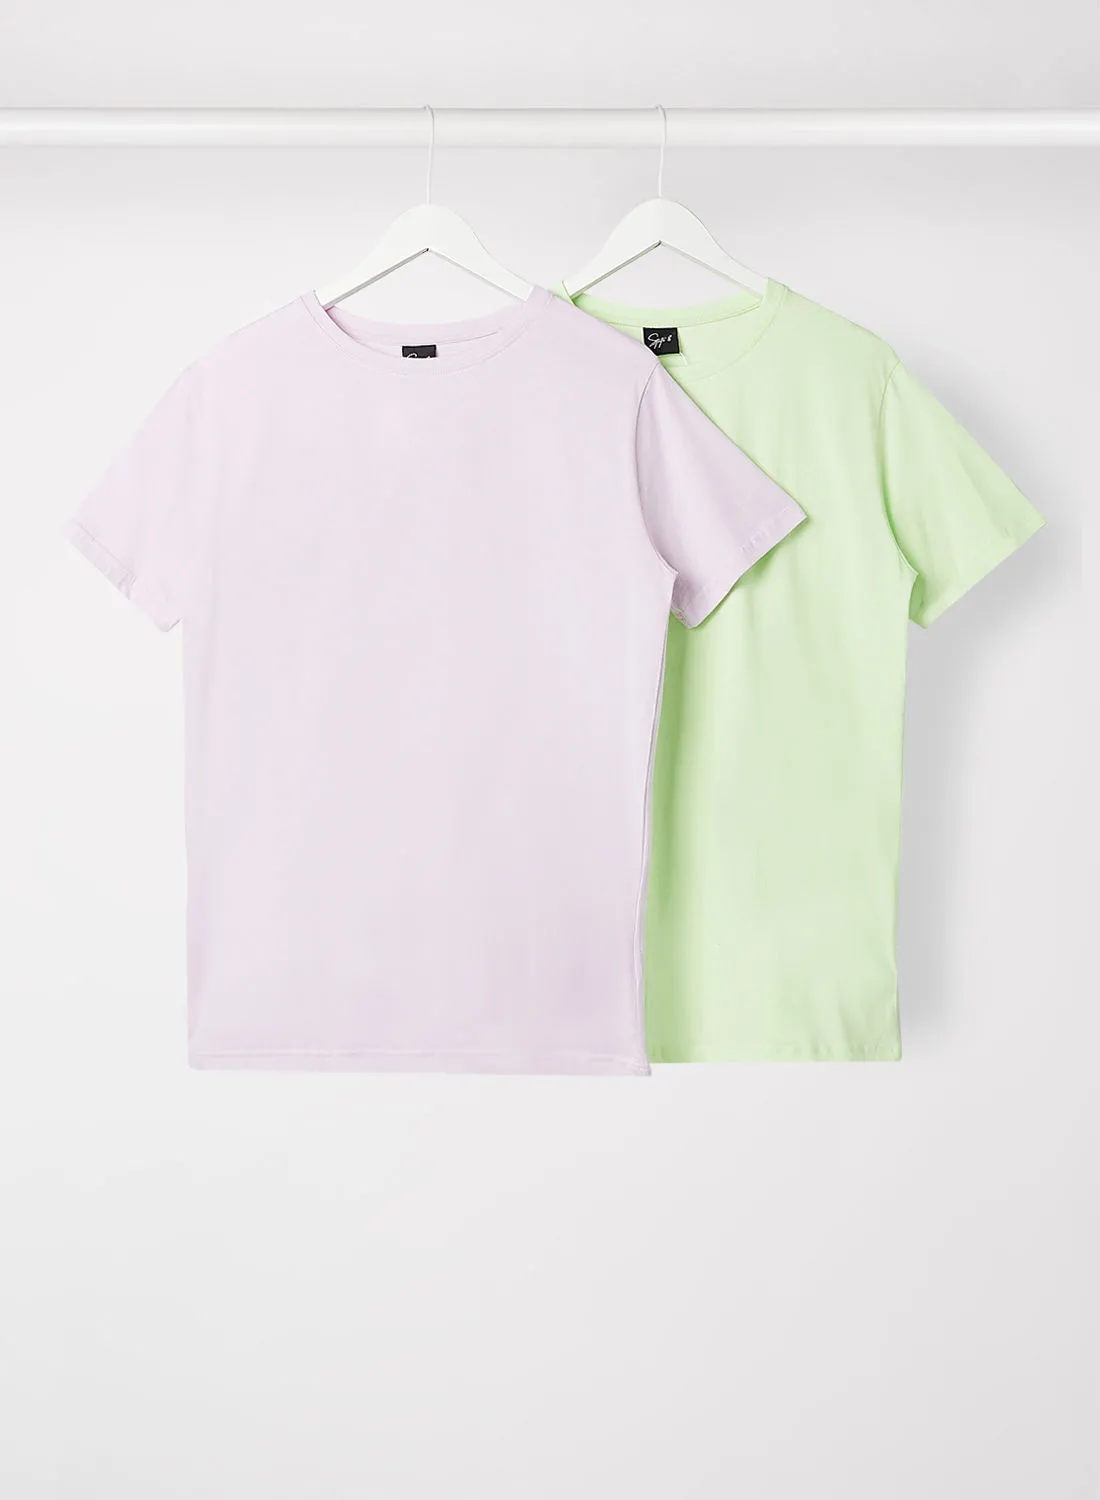 STATE 8 Short Sleeve T-Shirt (Pack of 2) Multicolour